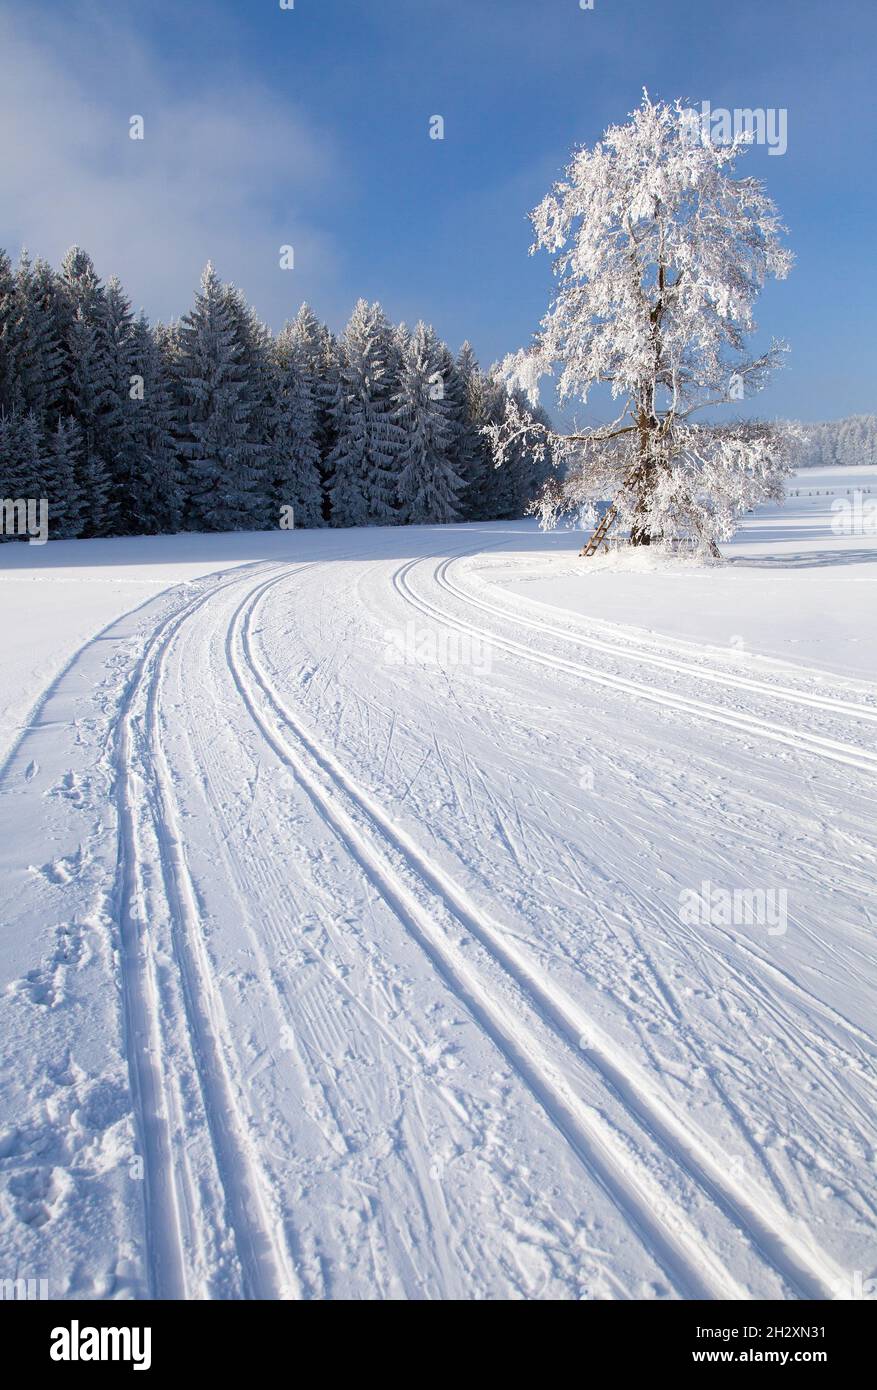 wintry landscape scenery with modified cross country skiing way Stock Photo